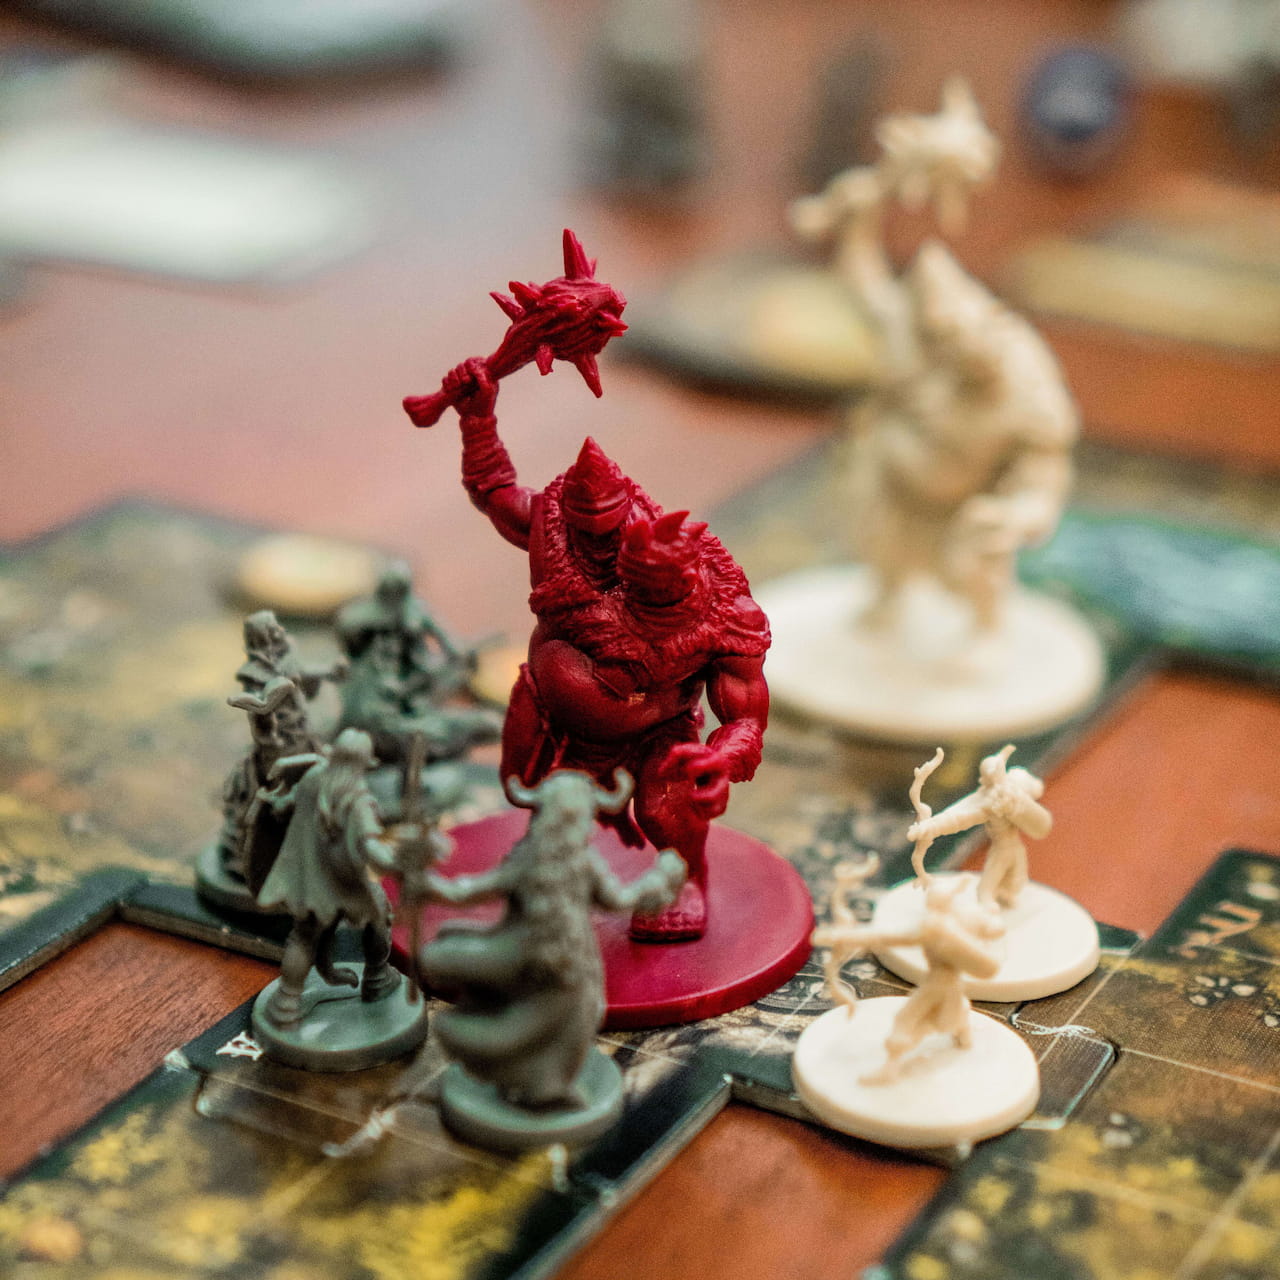 Some board game pieces on a table representing characters in battle.